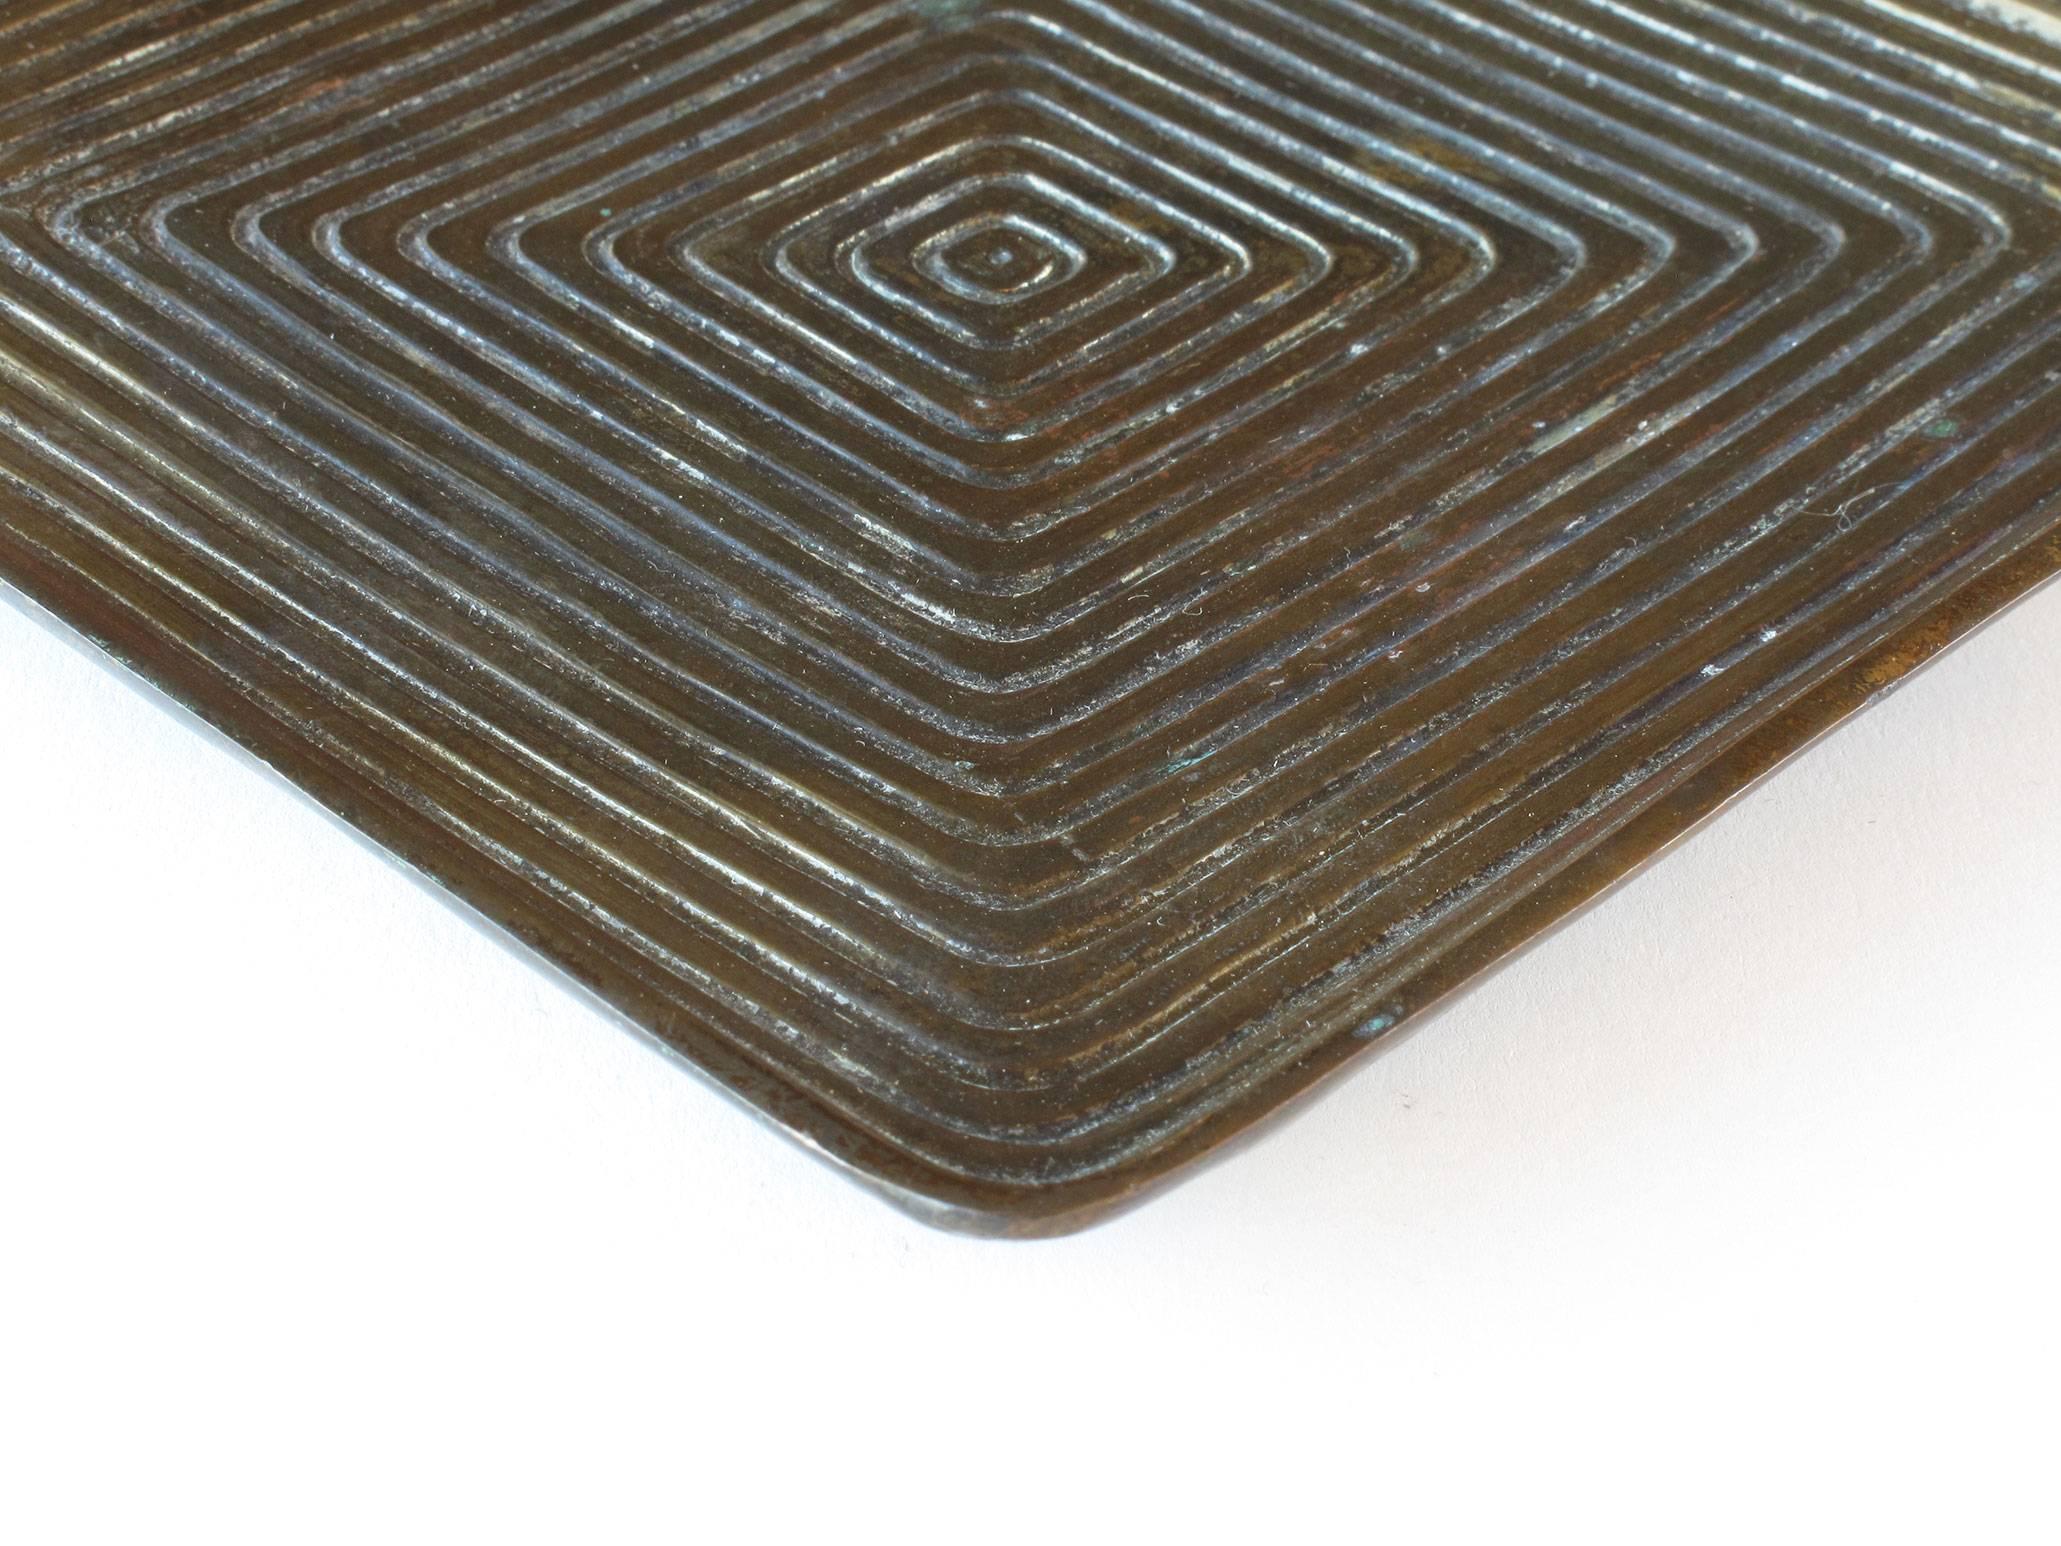 Ben Seibel tray or trivet, brass plated metal, 1950s, Jenfred Ware, New York. Measures: 5/8 high x 7 wide x 7 deep inches.